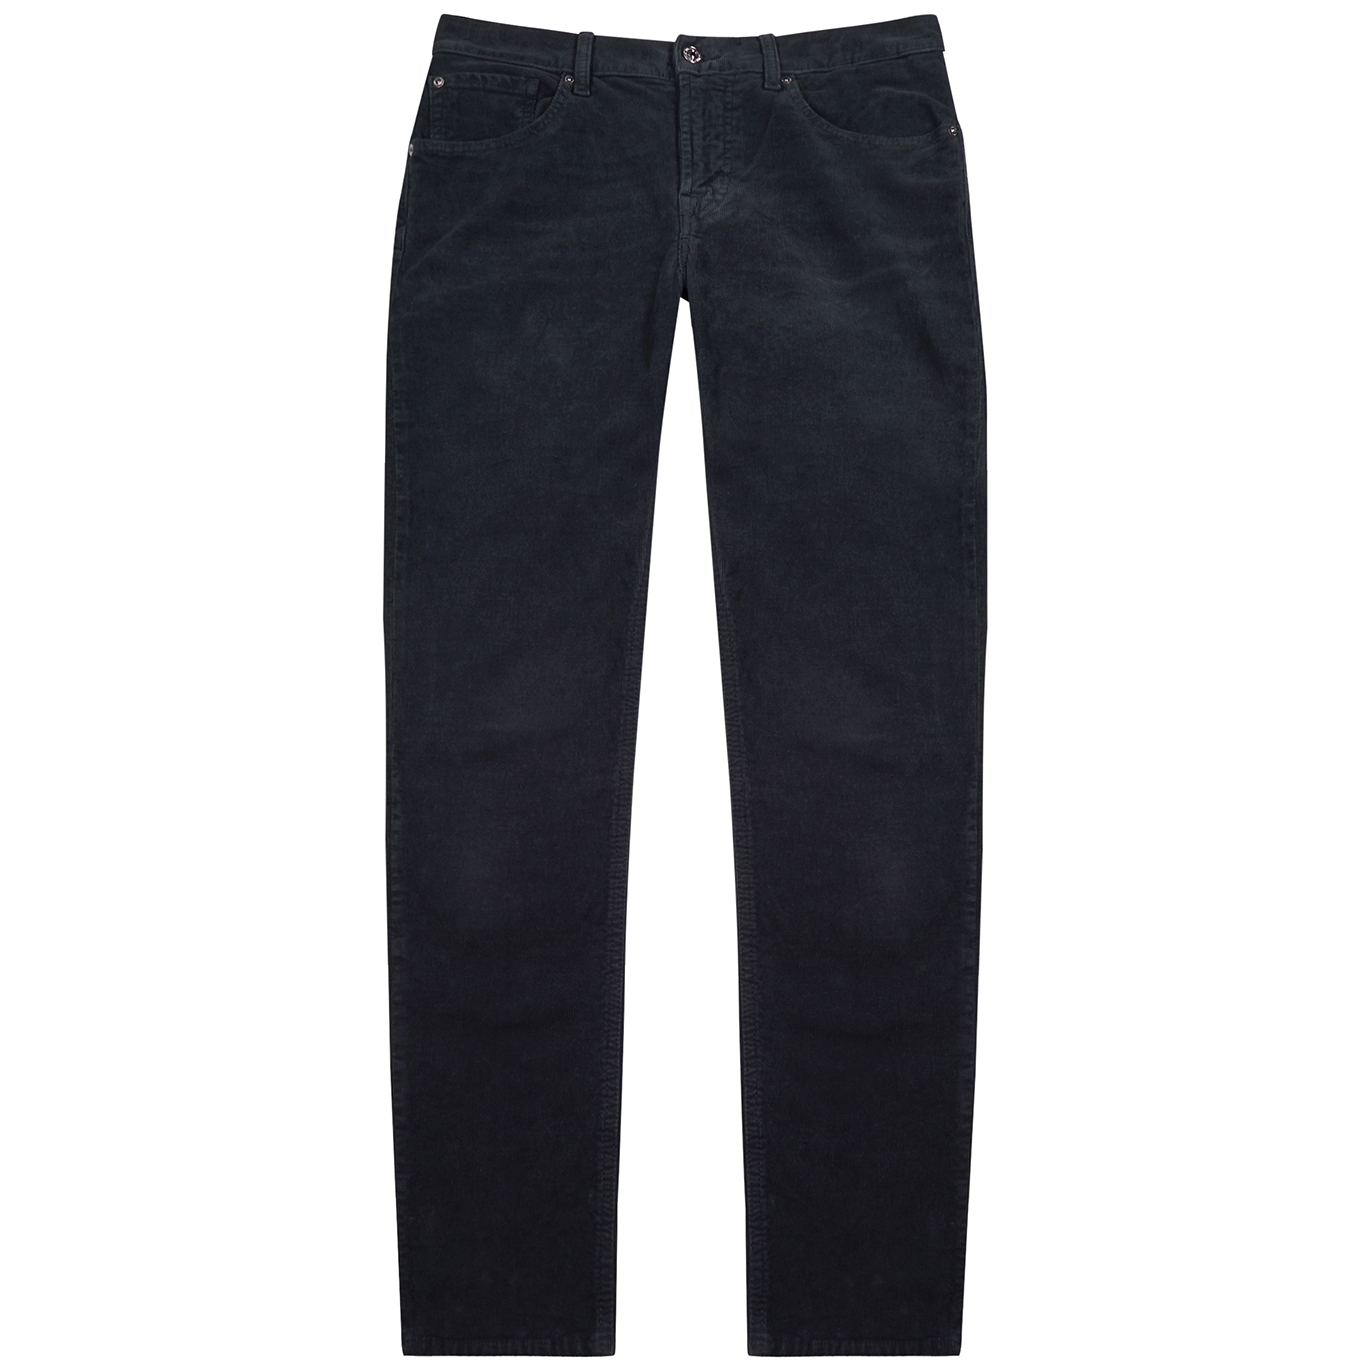 7 For All Mankind Slimmy Tapered Navy Corduroy Jeans - W34